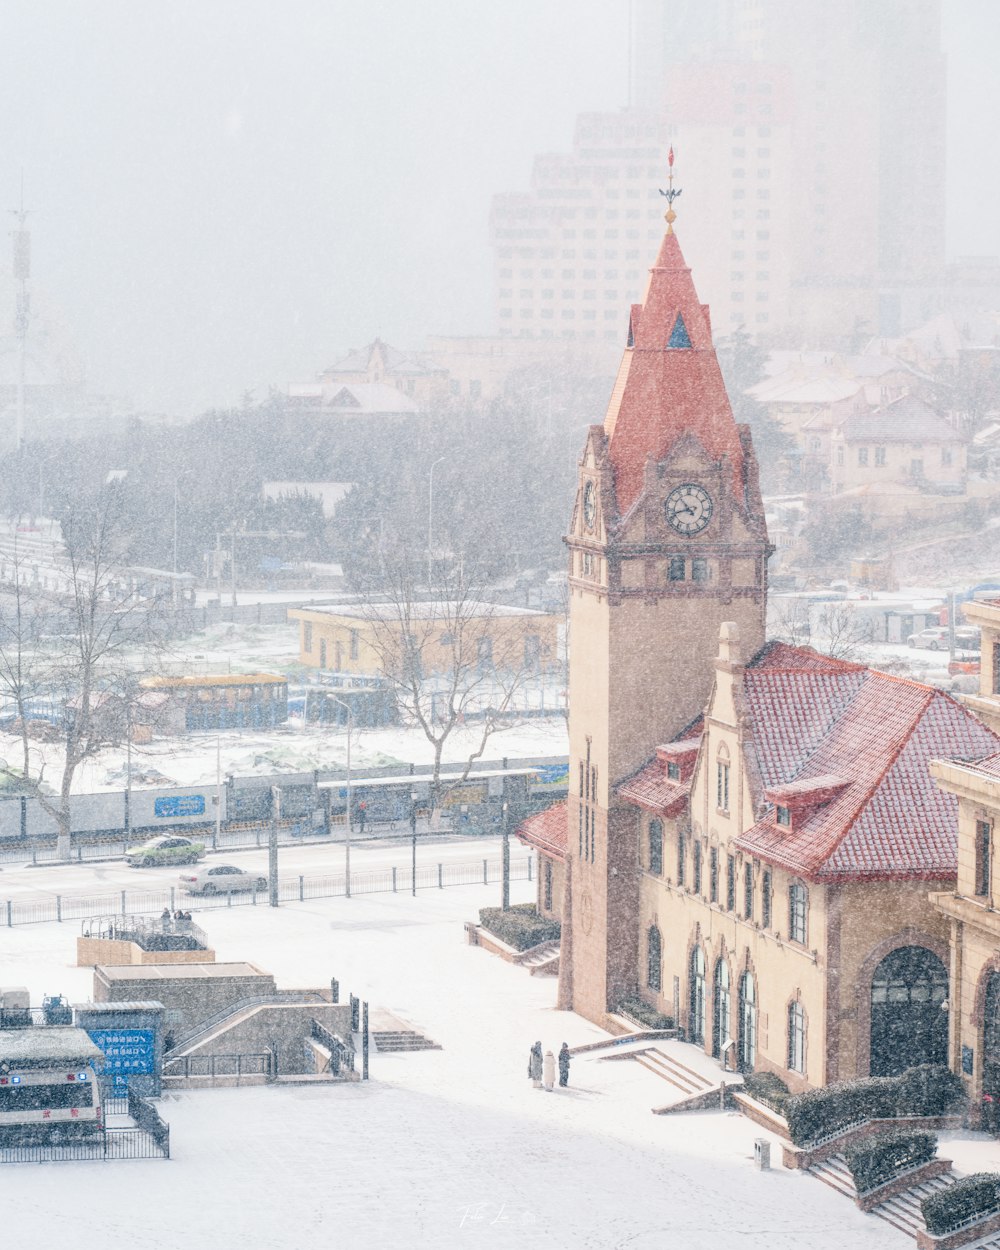 a clock tower in the middle of a snowy city